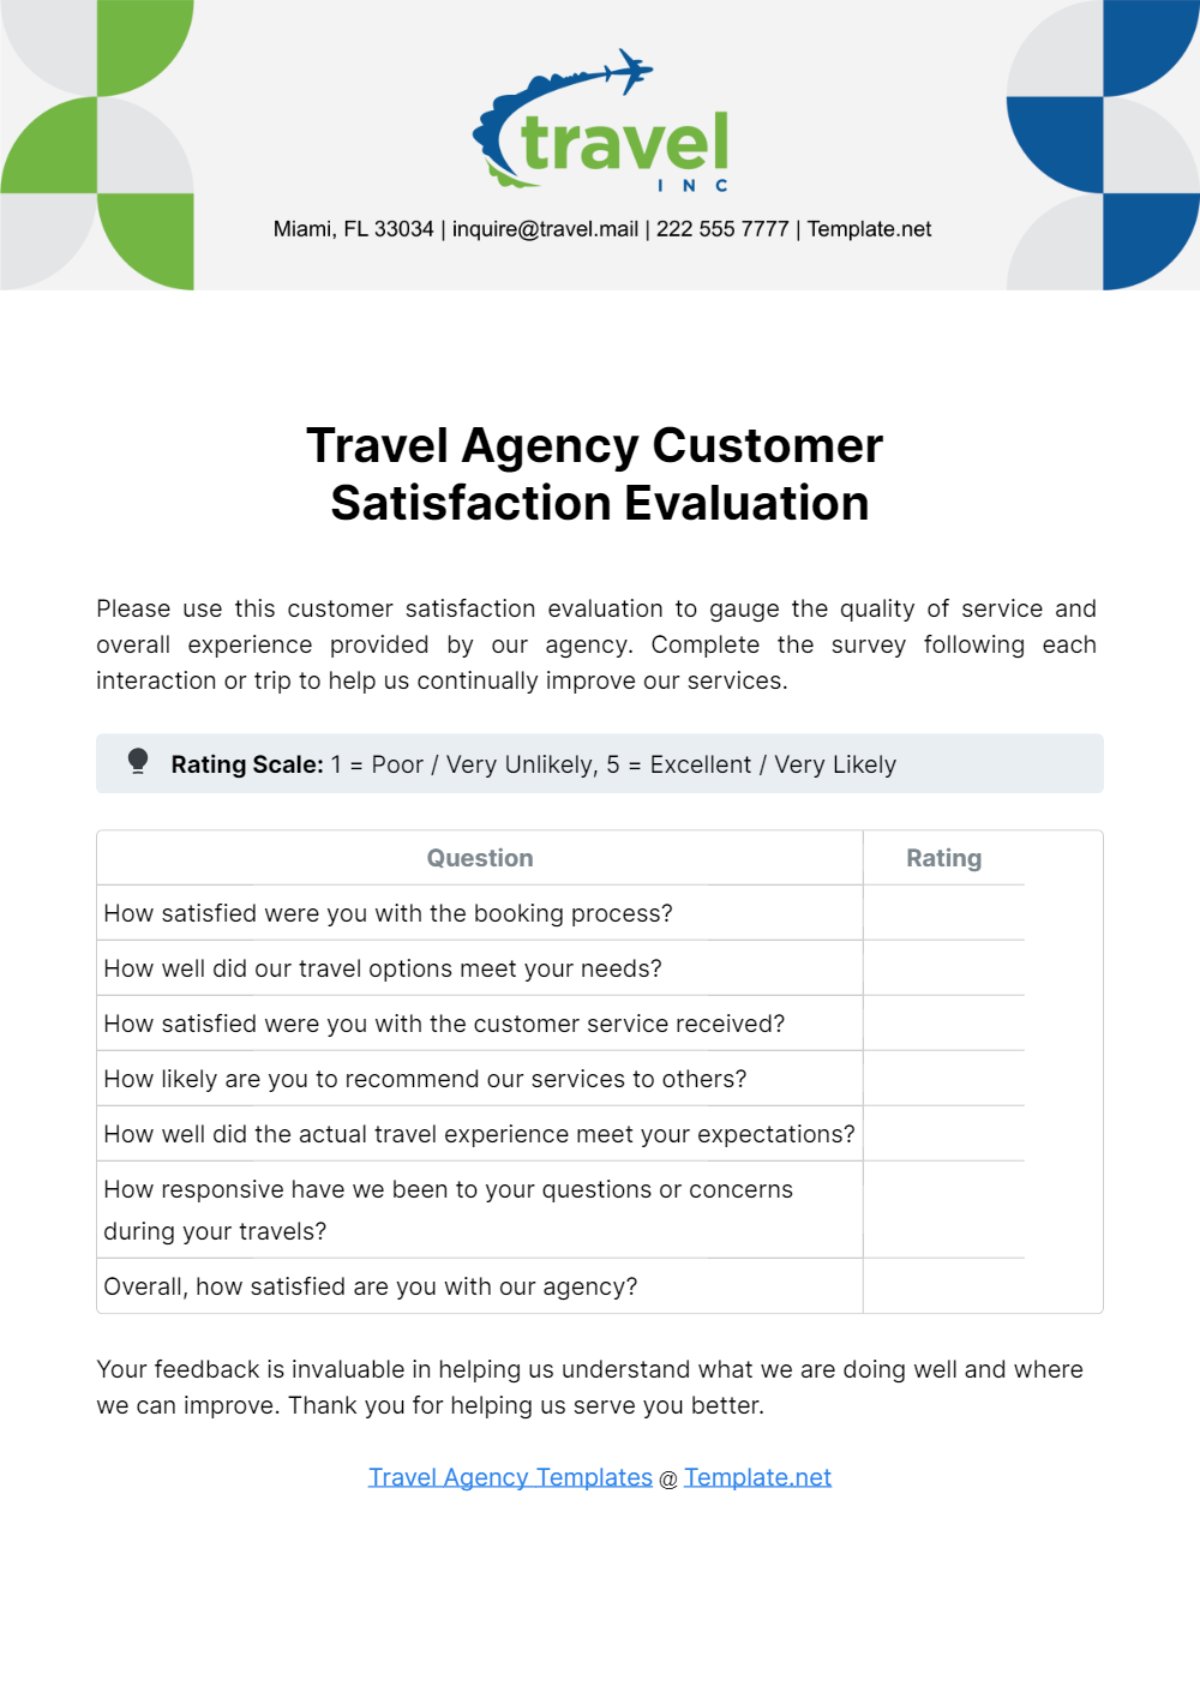 Free Travel Agency Customer Satisfaction Evaluation Template